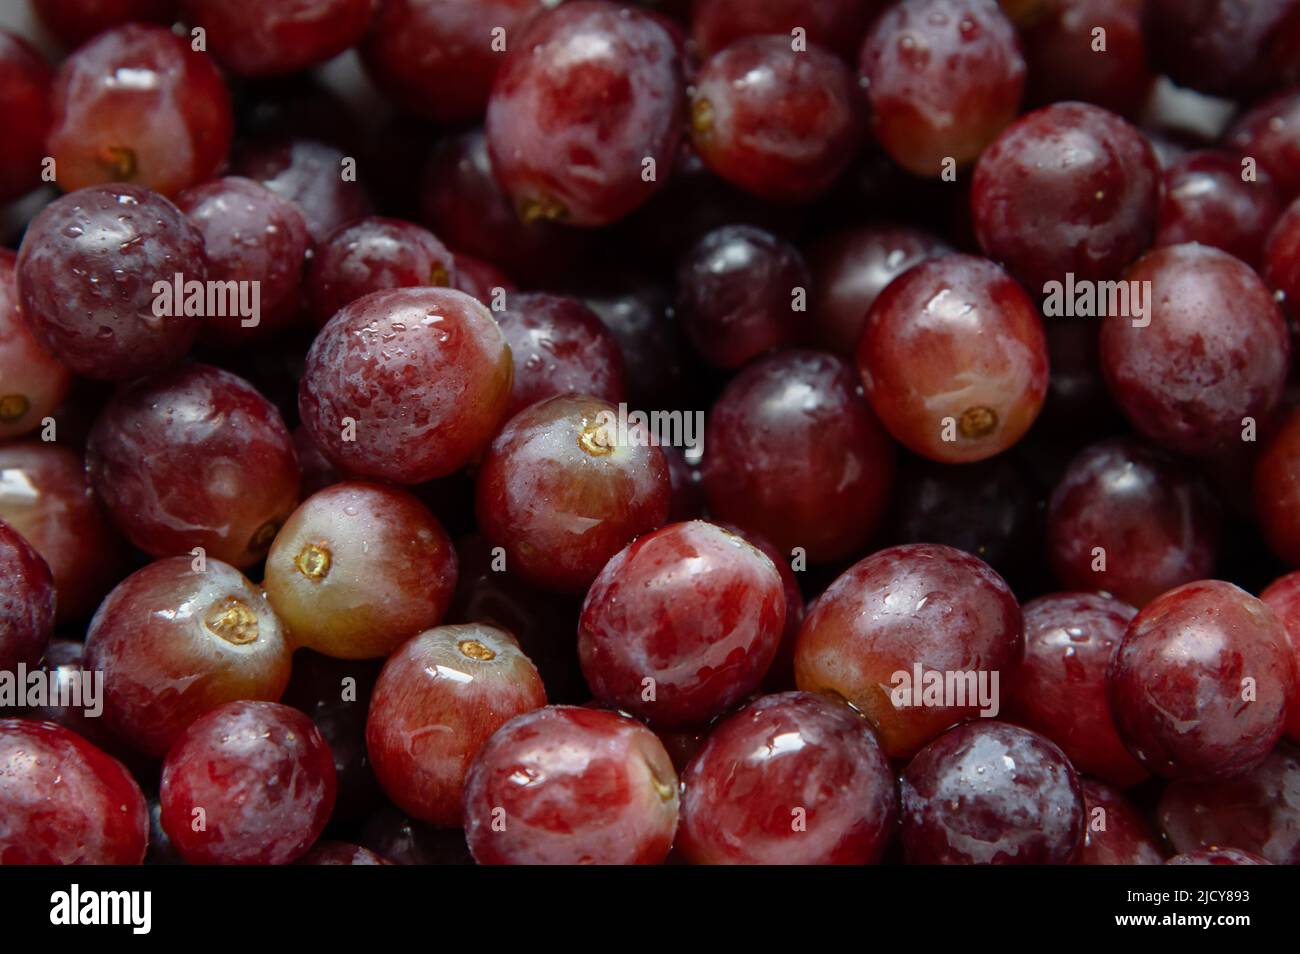 Bunch of Red Grapes, No Steams Stock Photo